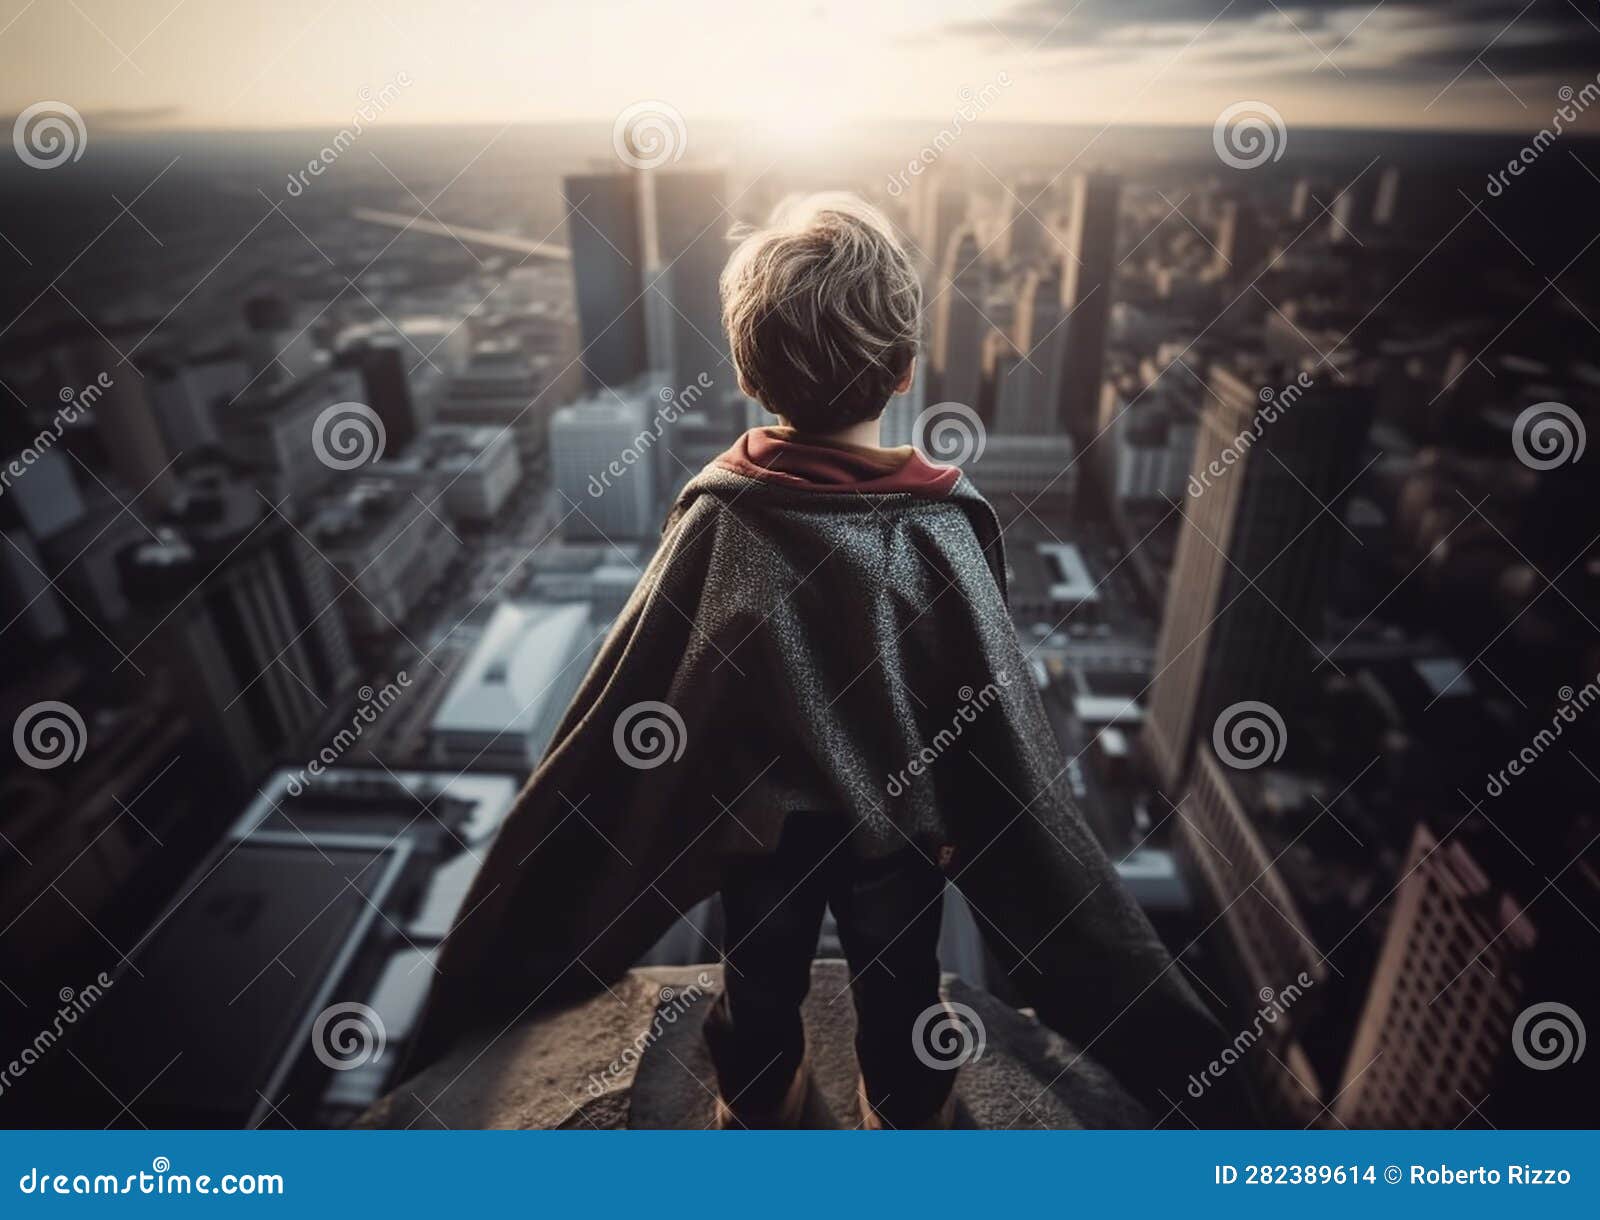 rear view of young boy on top of skycraper dreaming of becoming a superhero.